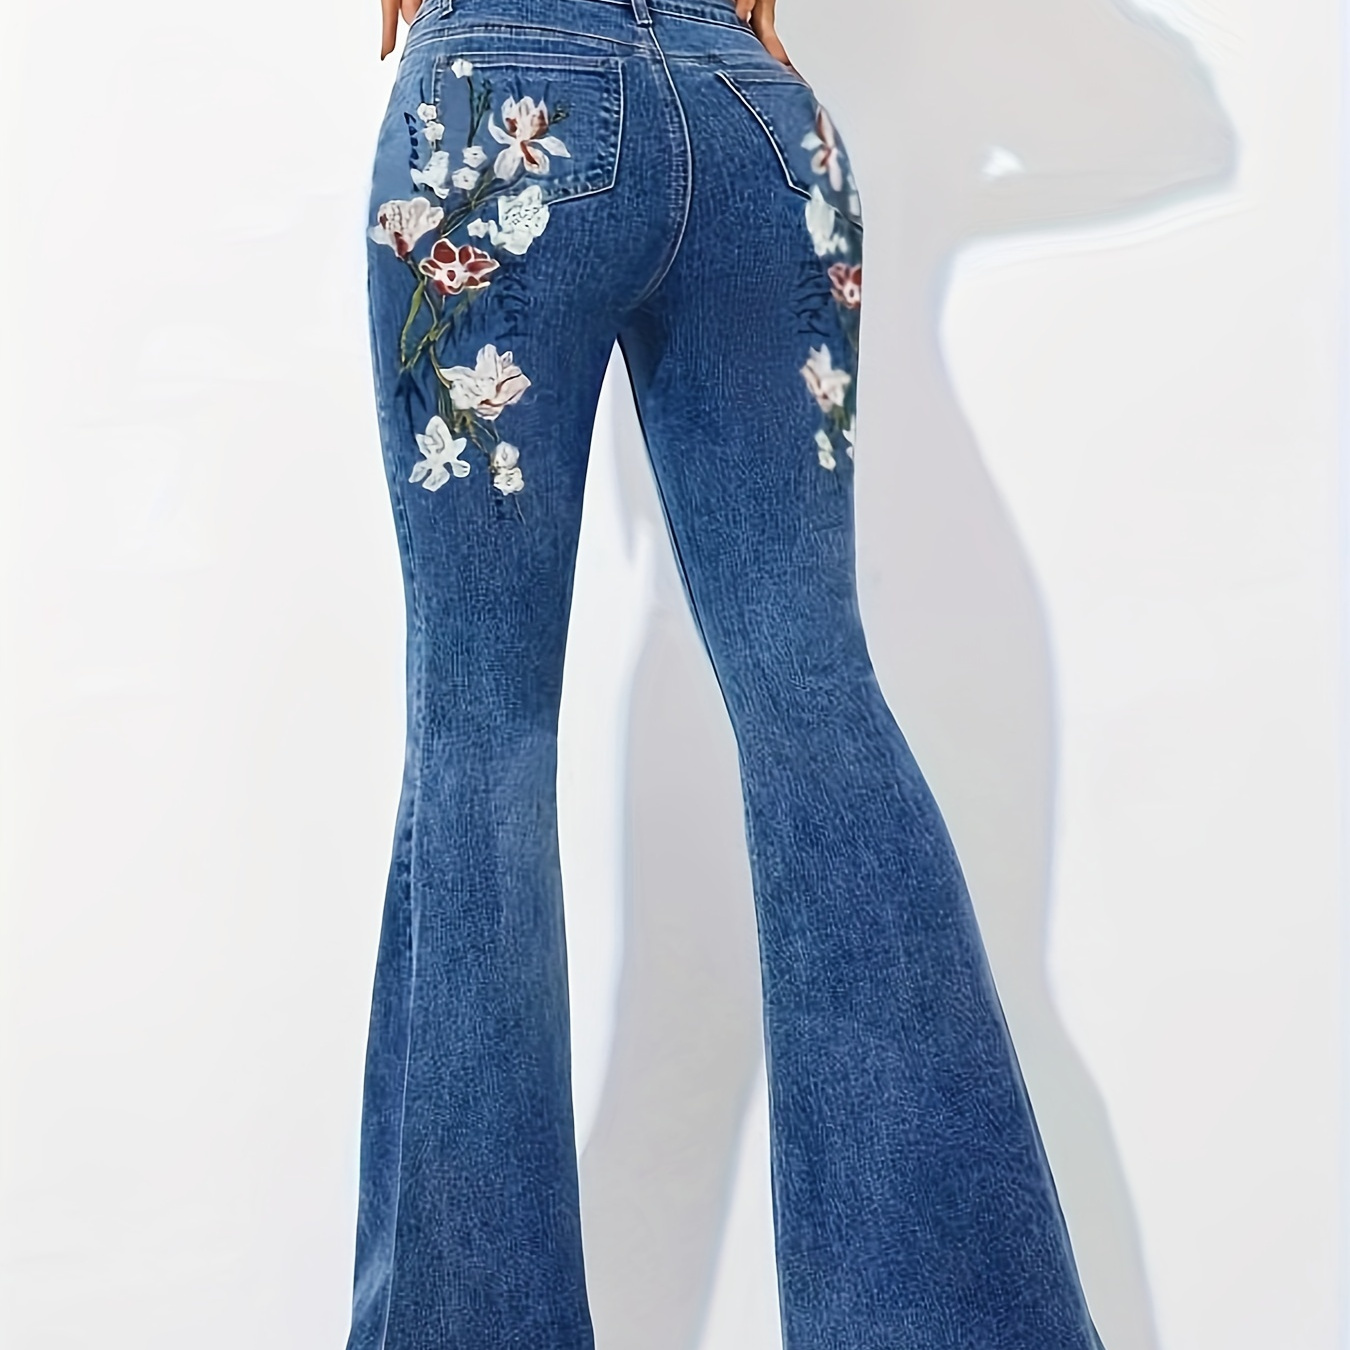 

Floral Embroidered Decor Flare Jeans, Slant Pockets High Stretch Bell Bottom Jeans, Women's Denim Jeans & Clothing